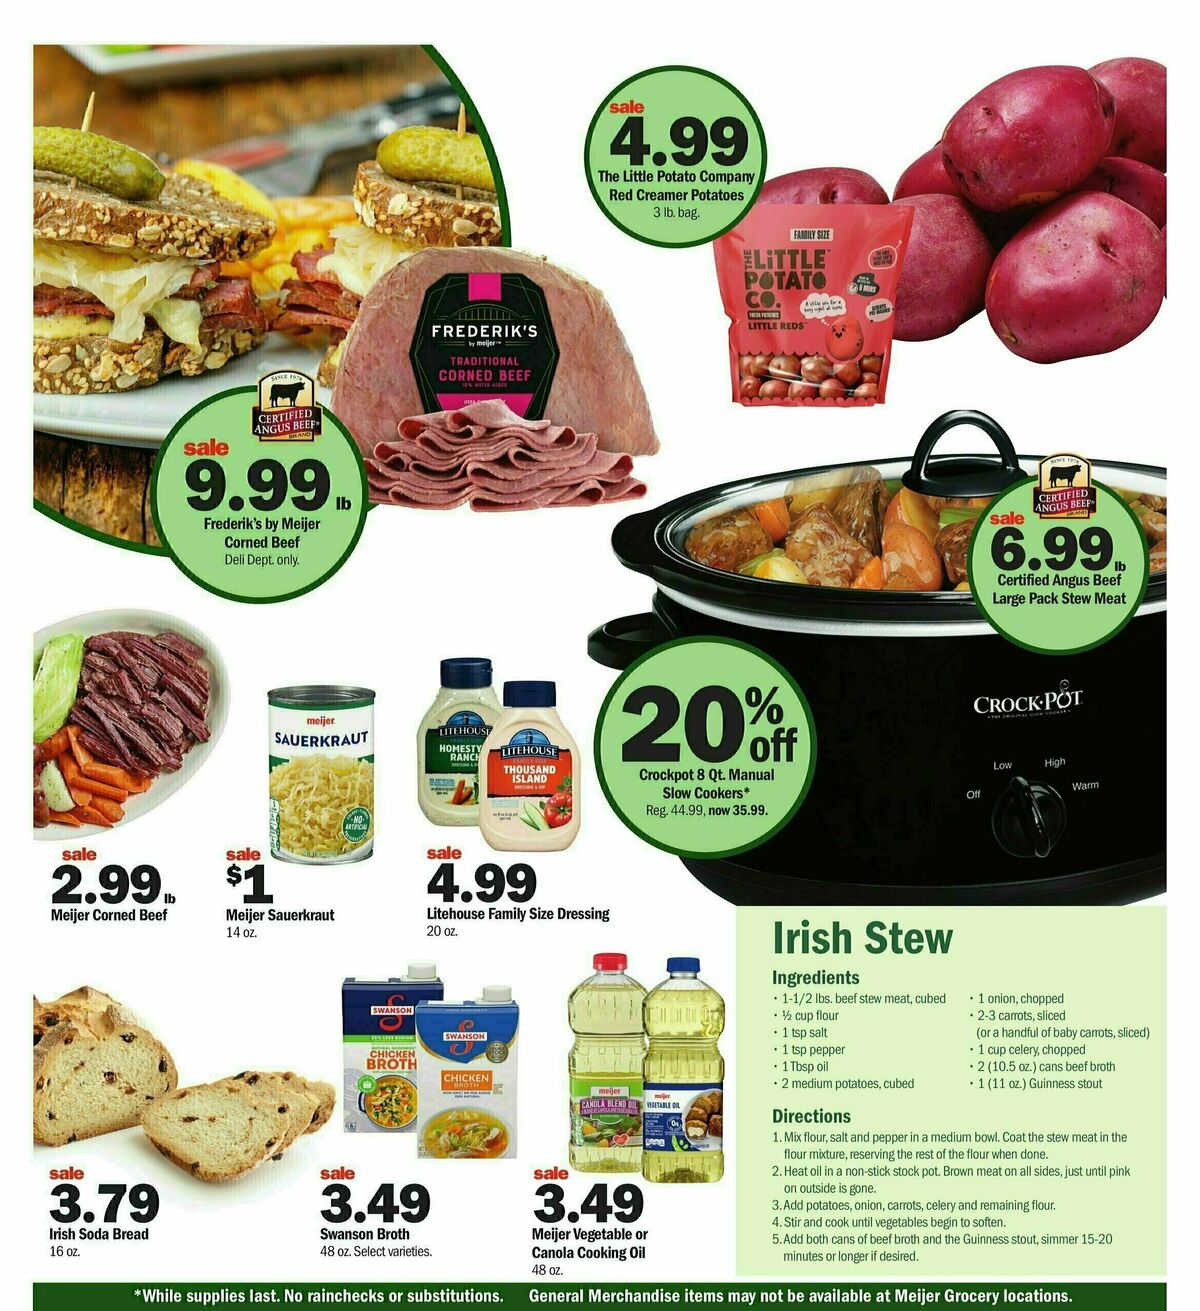 Meijer St. Patrick's Day Weekly Ad from March 10